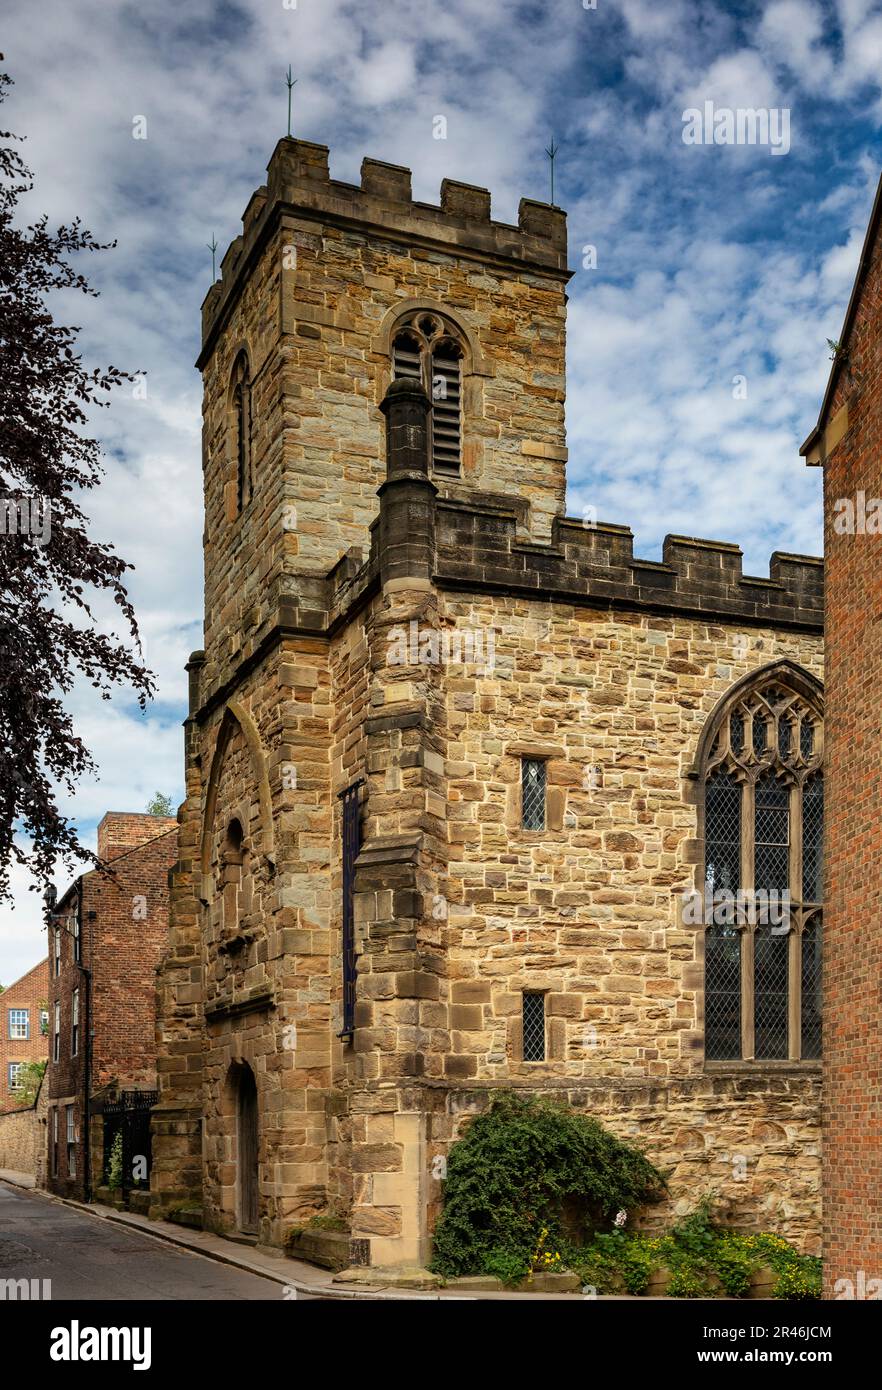 ST MARY-LE-BOW CHURCH, in Durham, a city in northeast England. Stock Photo